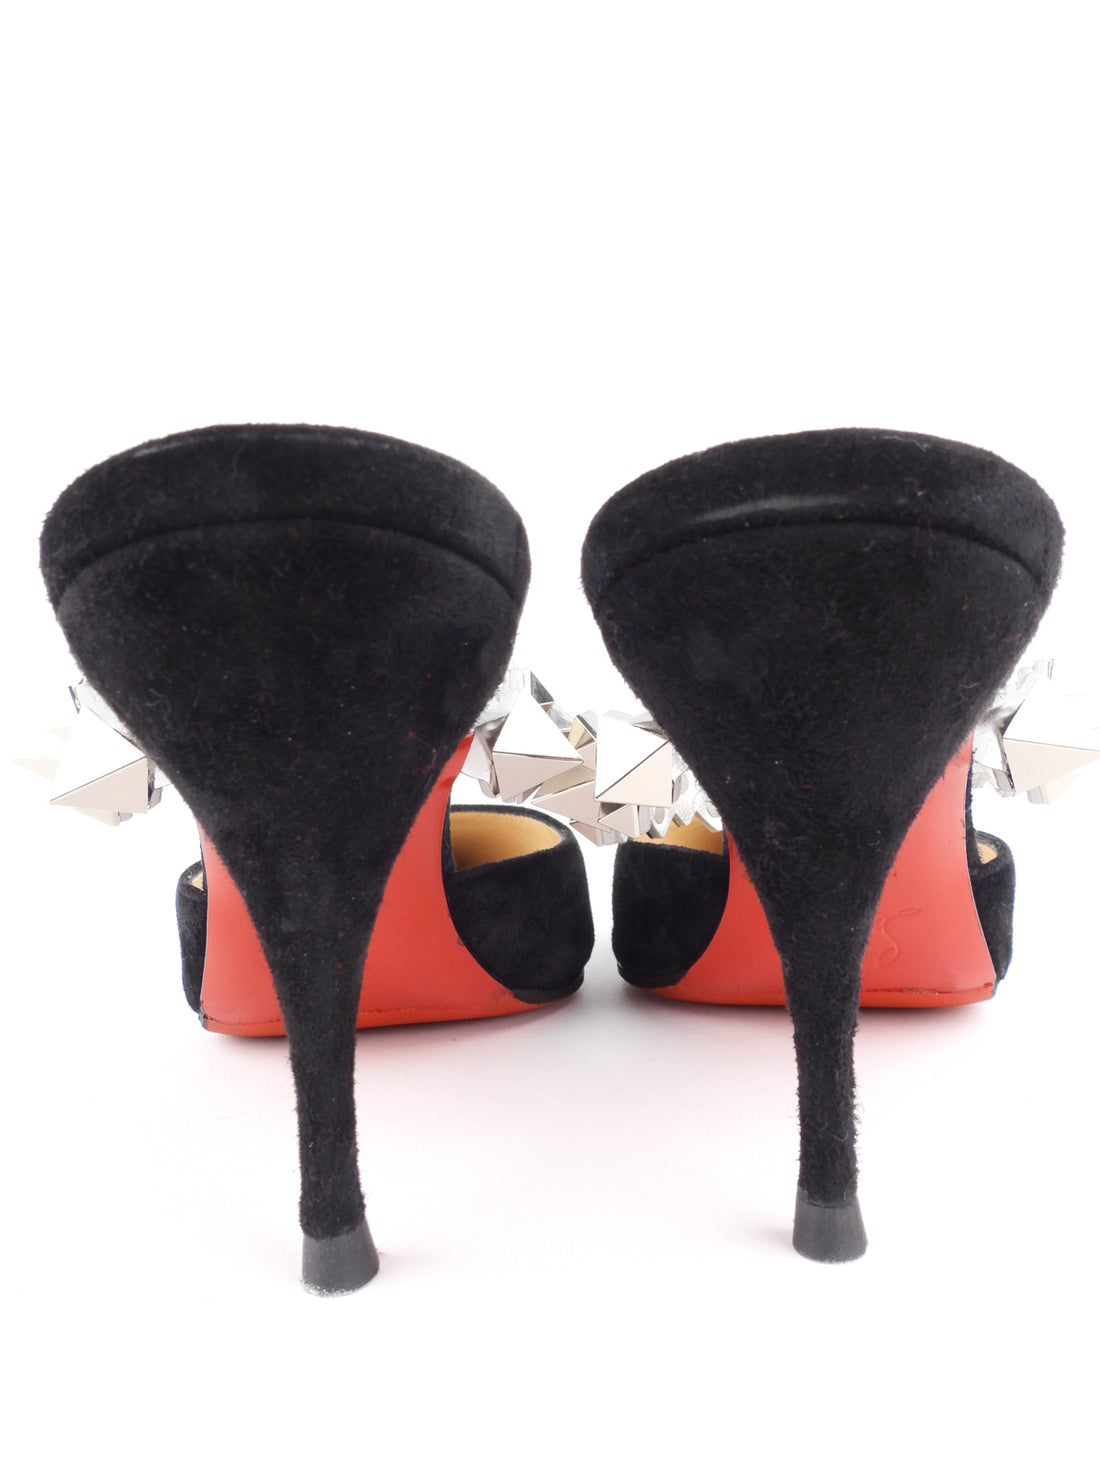 Christian Louboutin Black Suede Leather Spikey Strap Planet Choc 80 Mule - 39